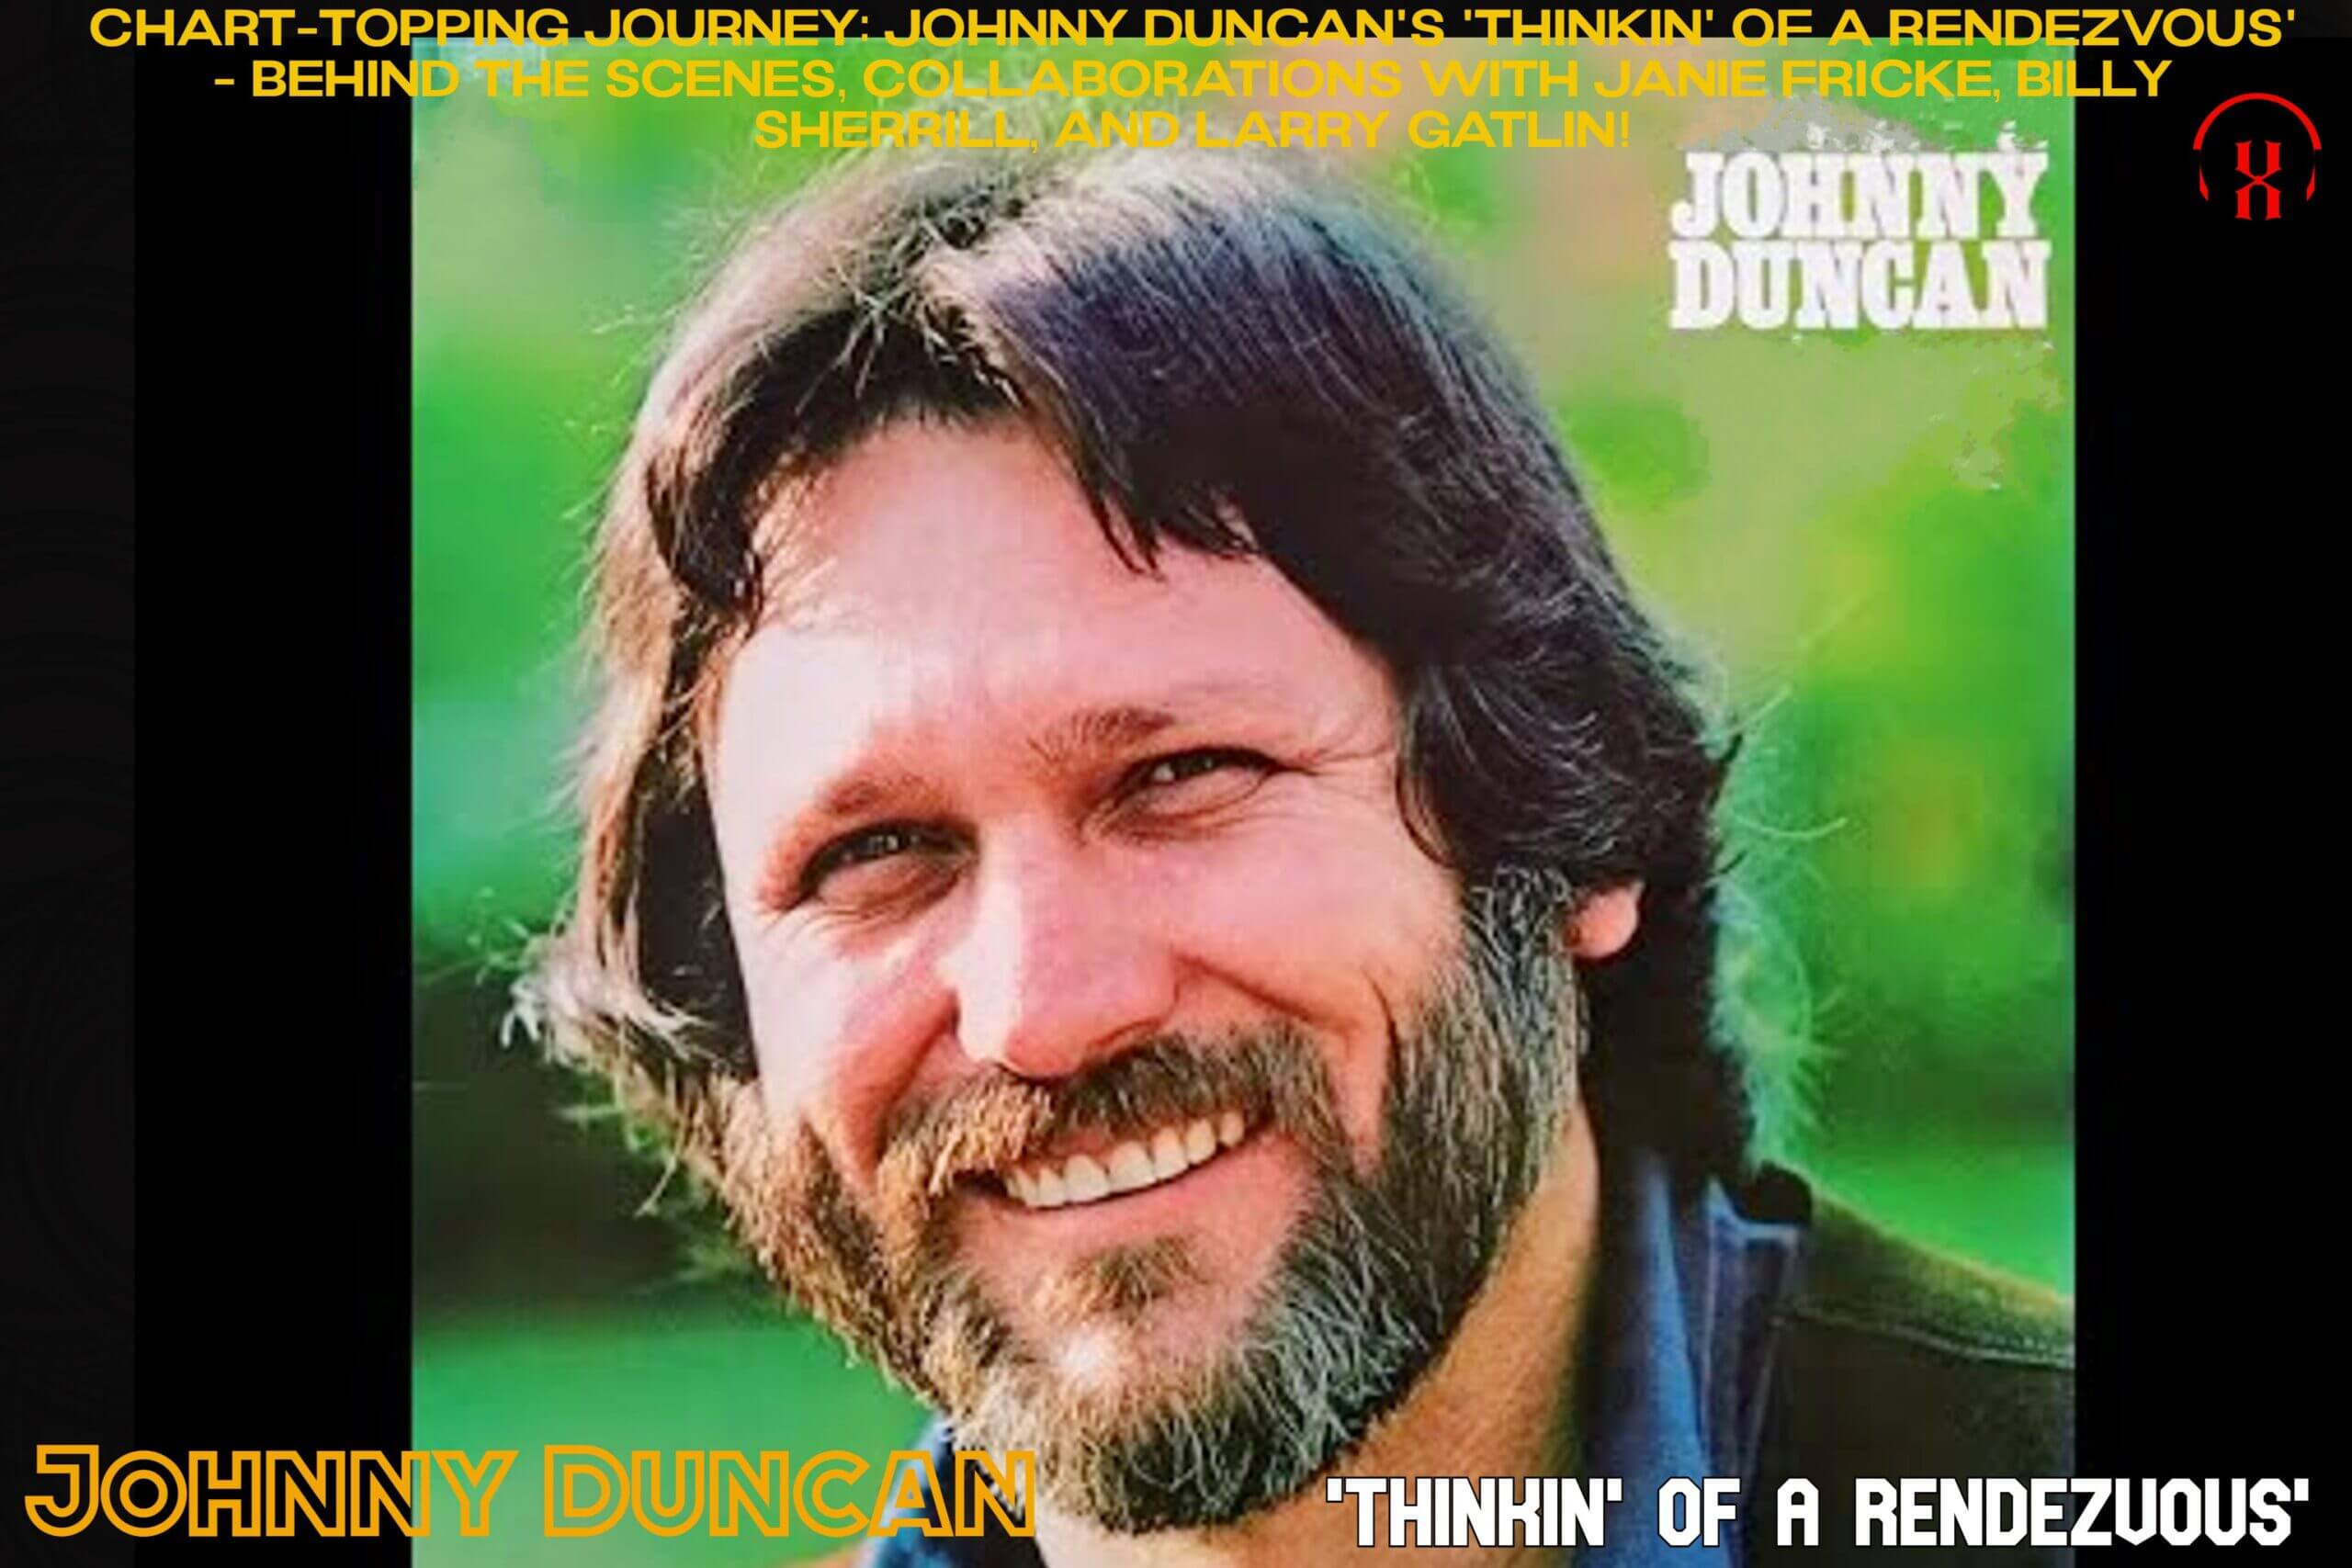 Johnny Duncan's 'Thinkin' Of A Rendezvous' - Behind the Scenes, Collaborations with Janie Fricke, Billy Sherrill, and Larry Gatlin!